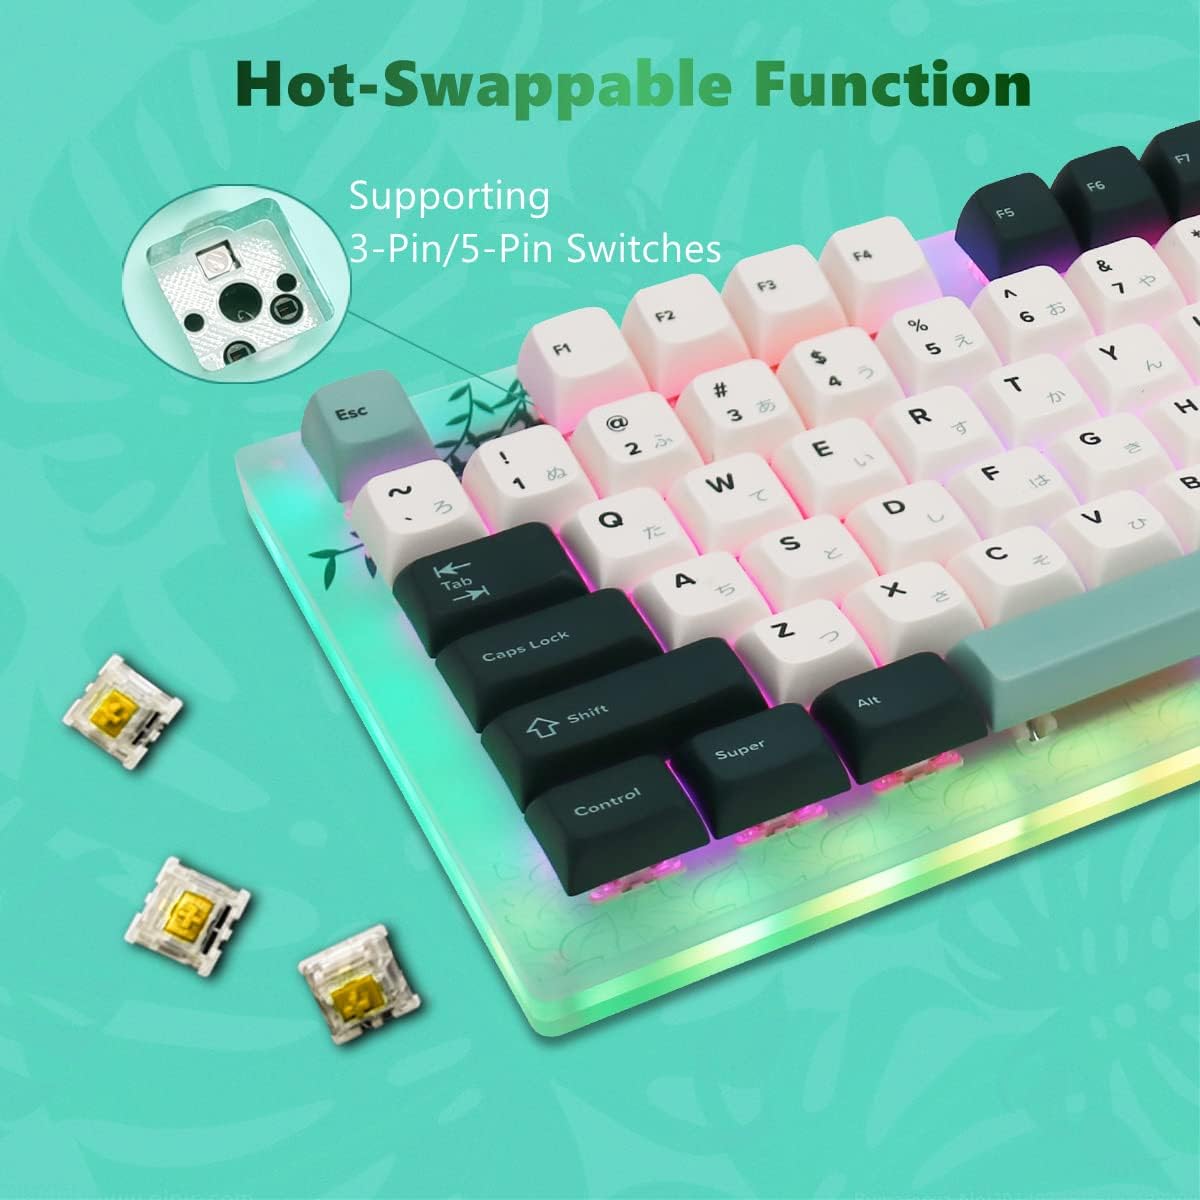 Gaming Mechanical Keyboard TKL Hot Swappable RGB with Plant Theme